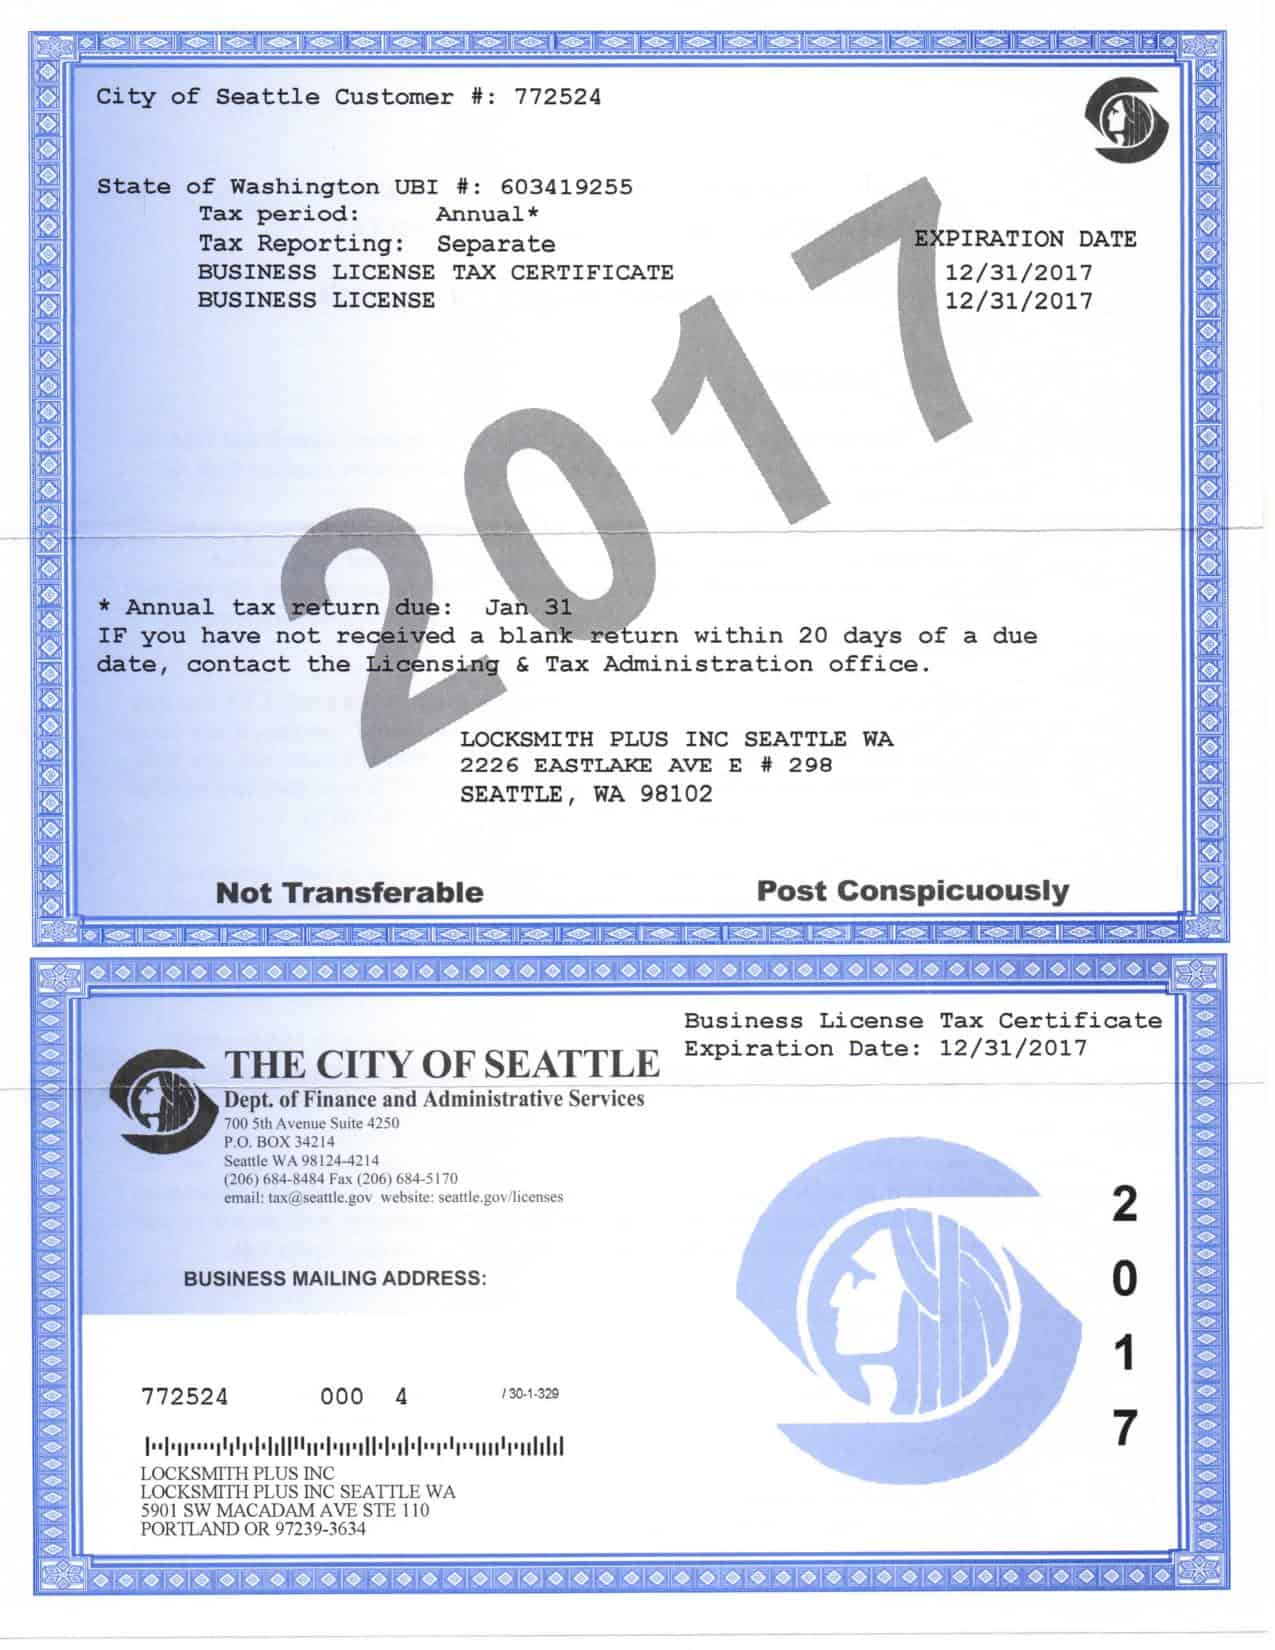 City of seattle business license fee